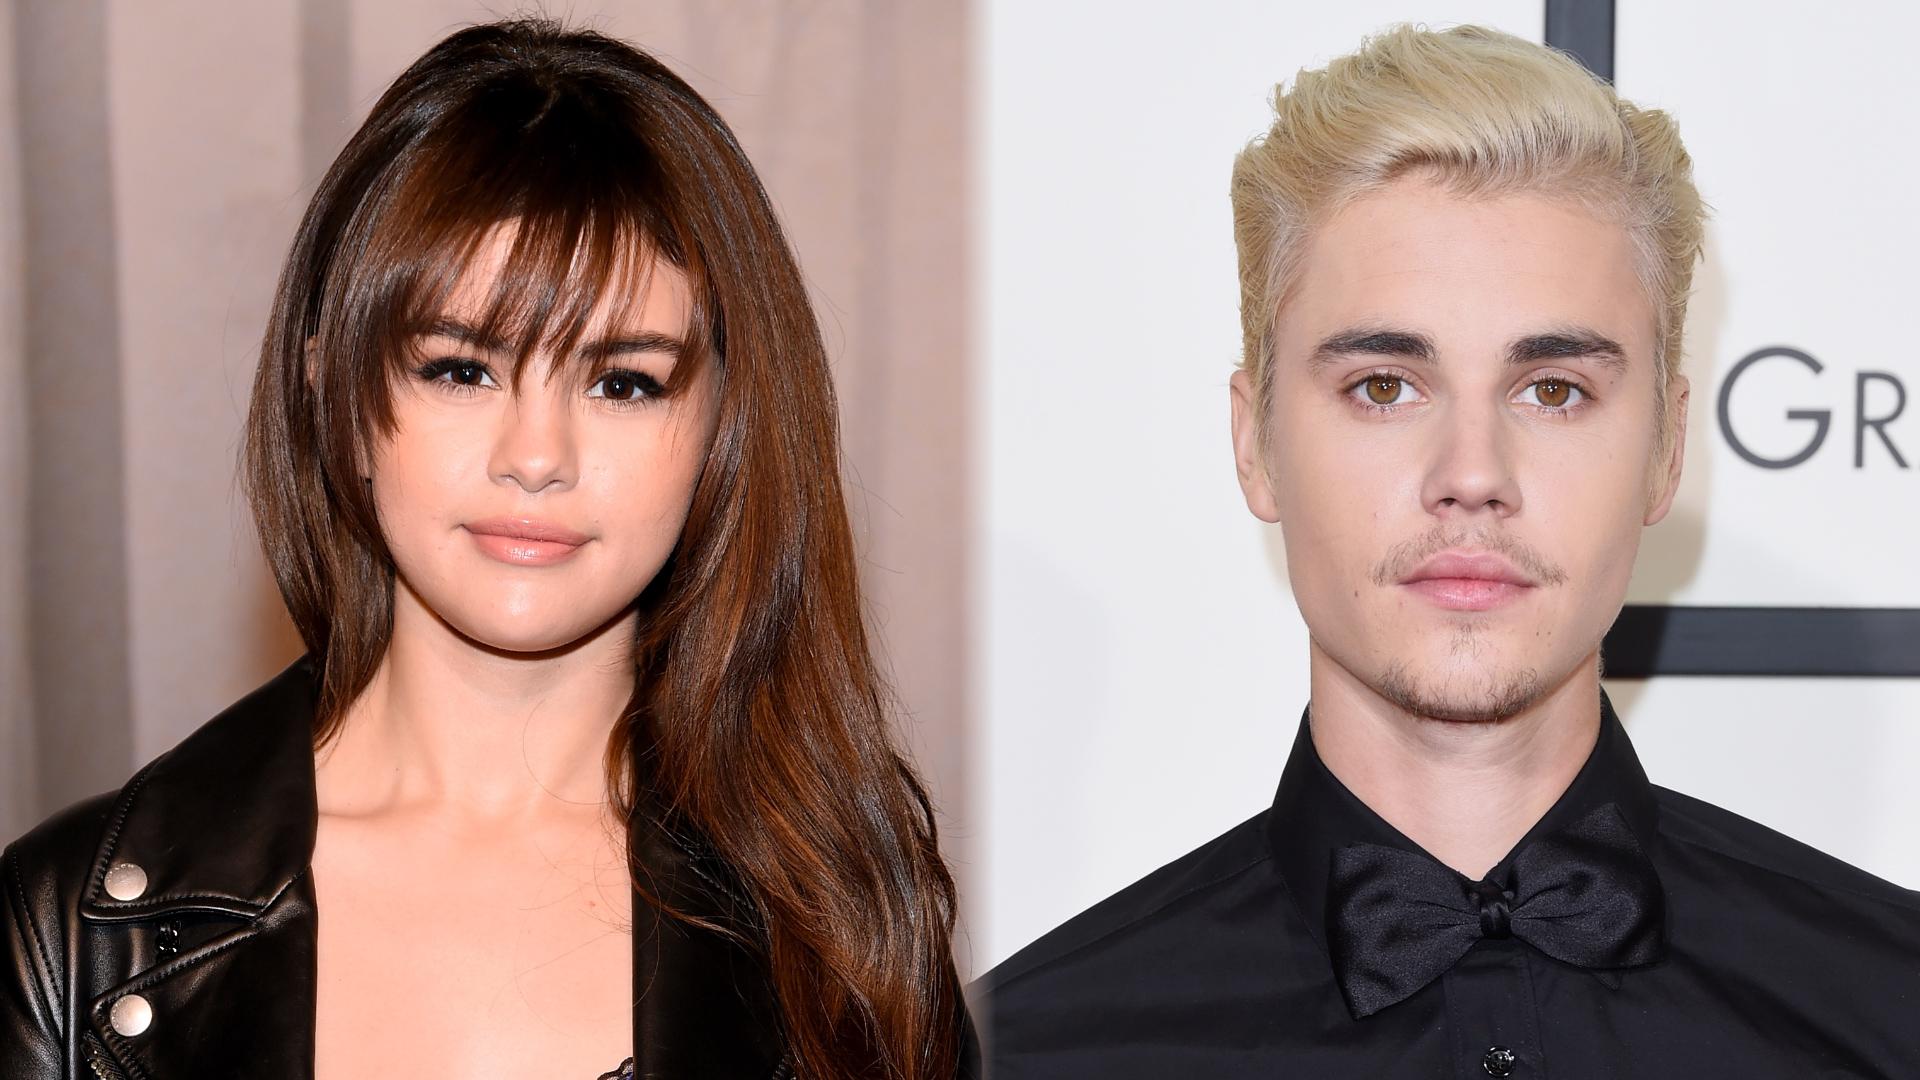 Selena Gomez and Justin Bieber relationship dating